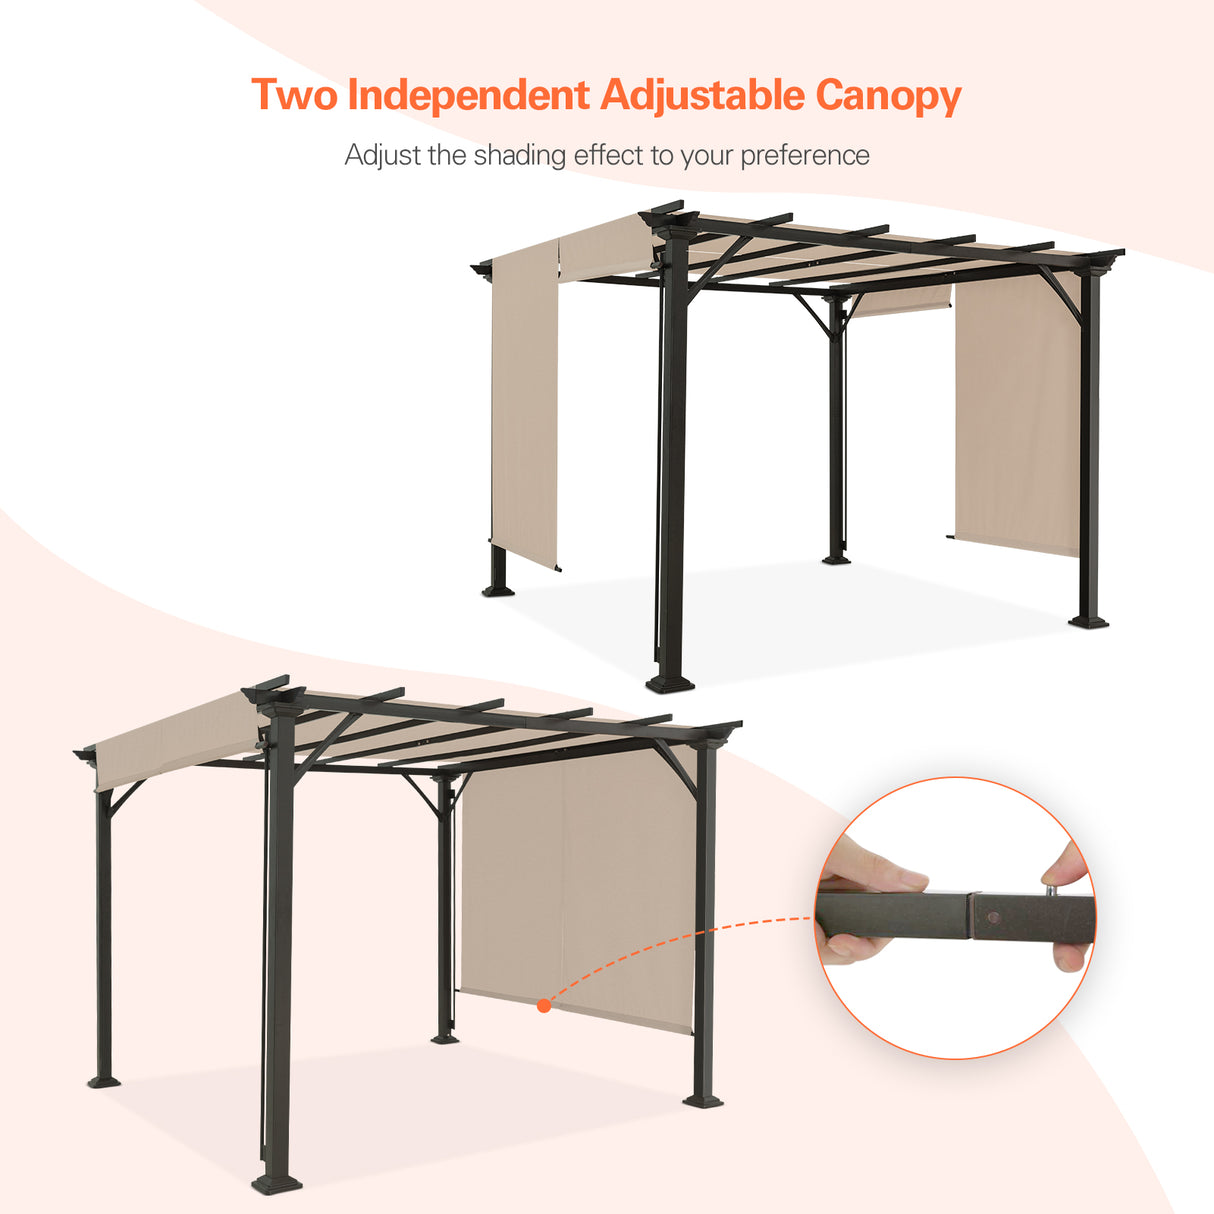 Eagle Peak 10Ftx10Ft Metal Pergola with Polyester Top